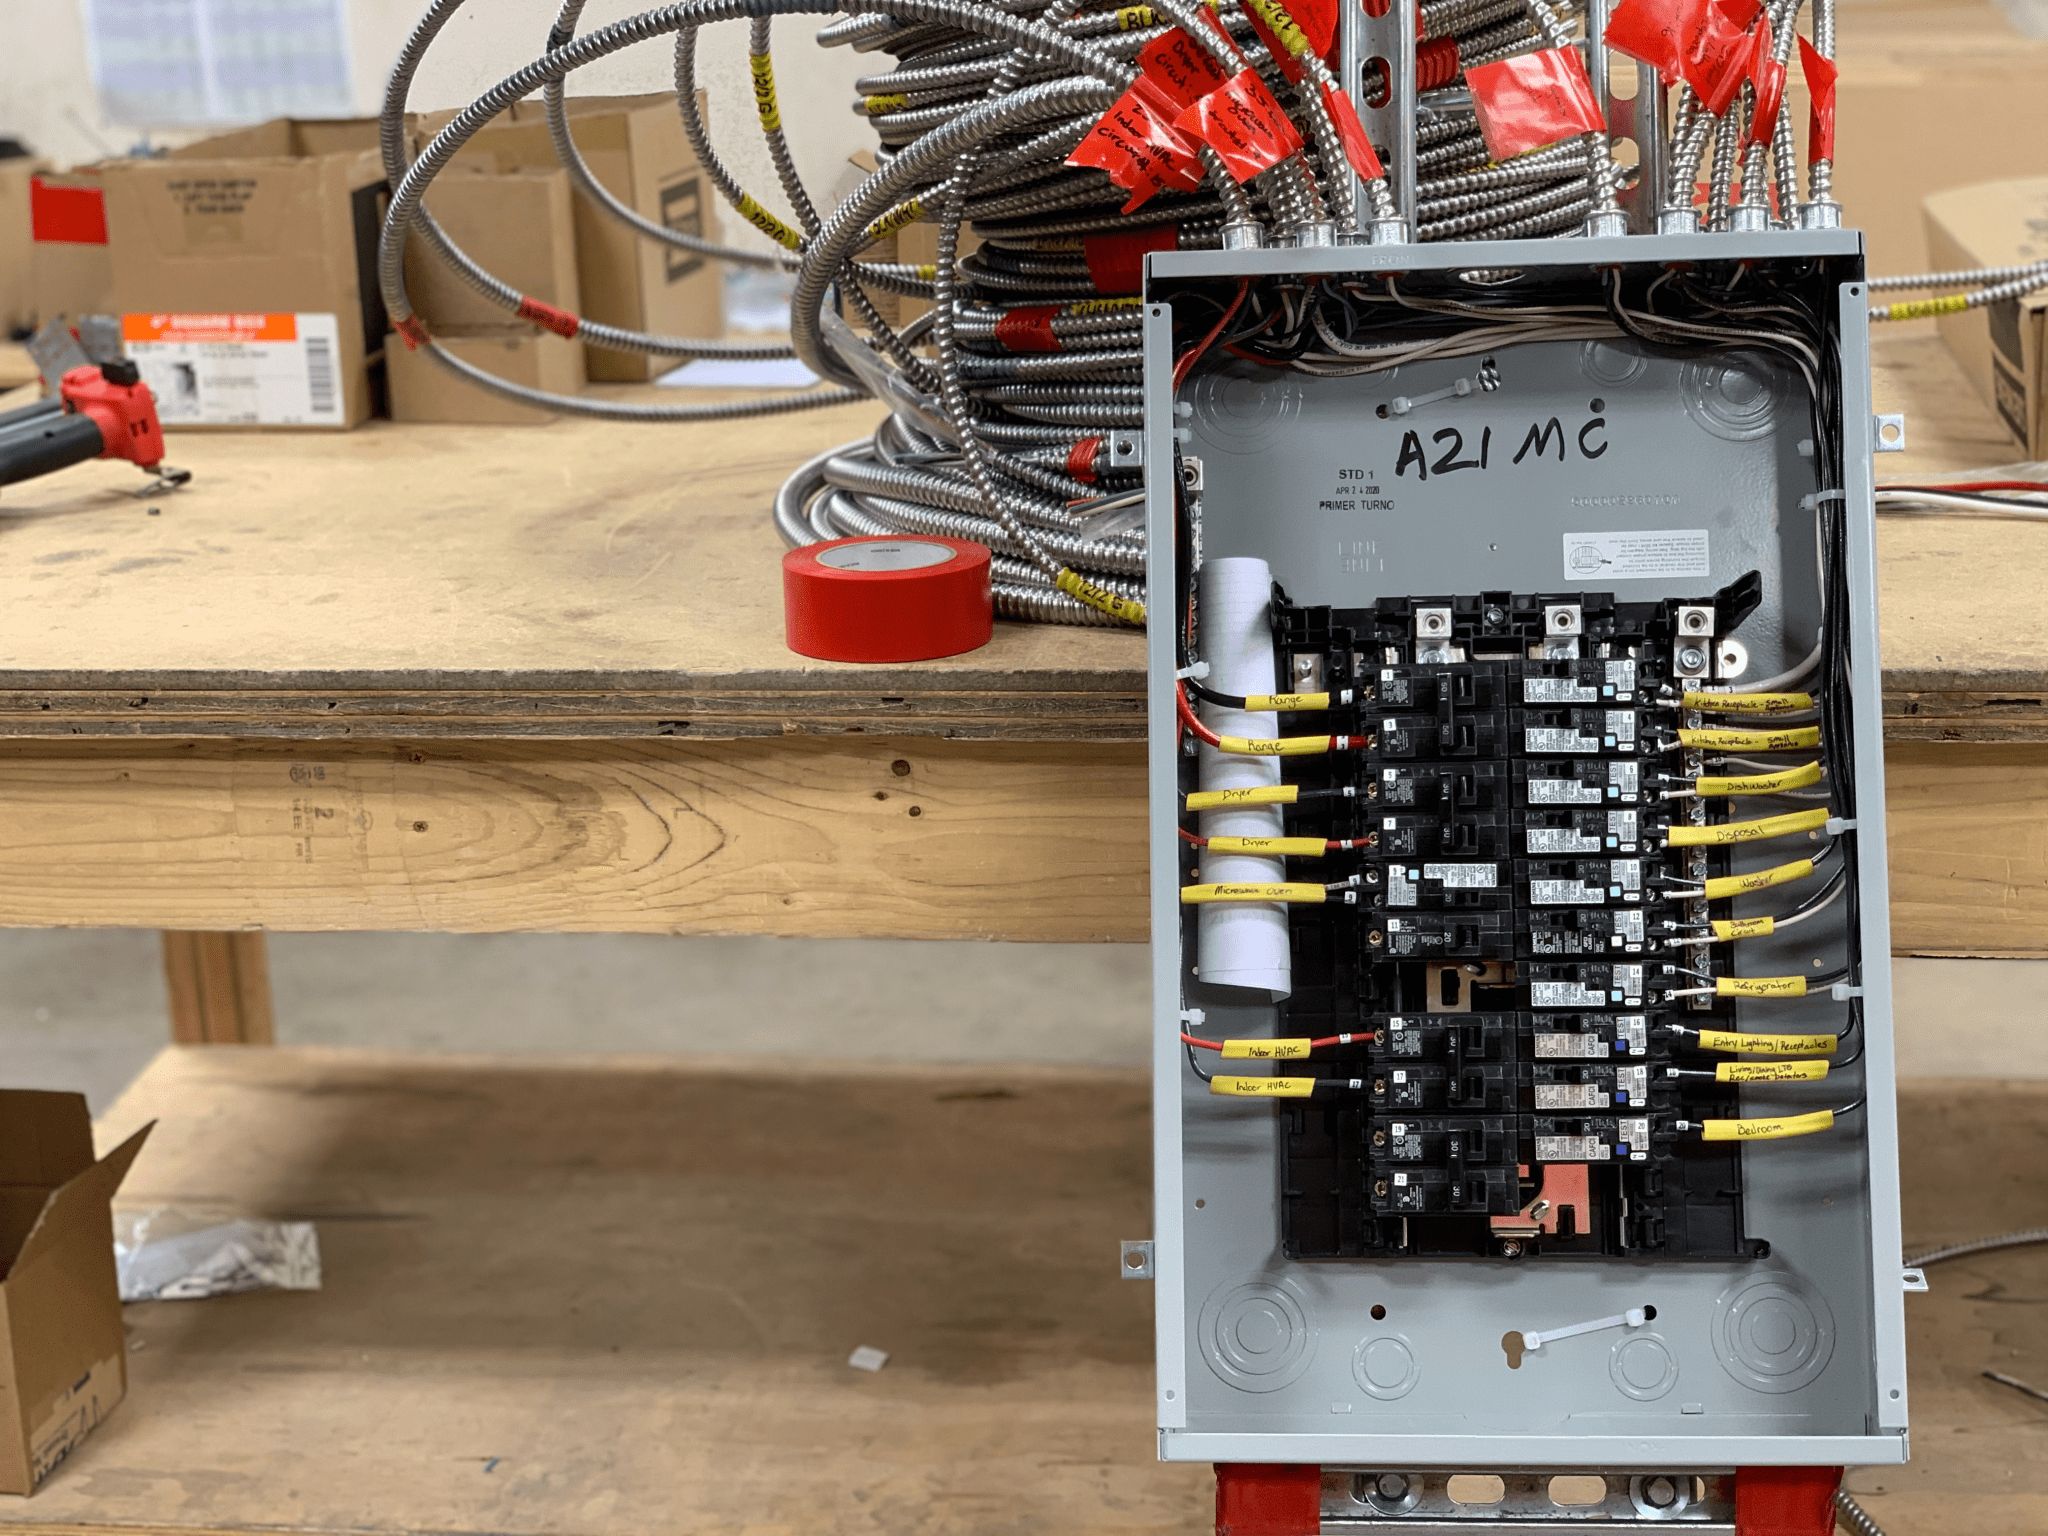 an open electrical panel